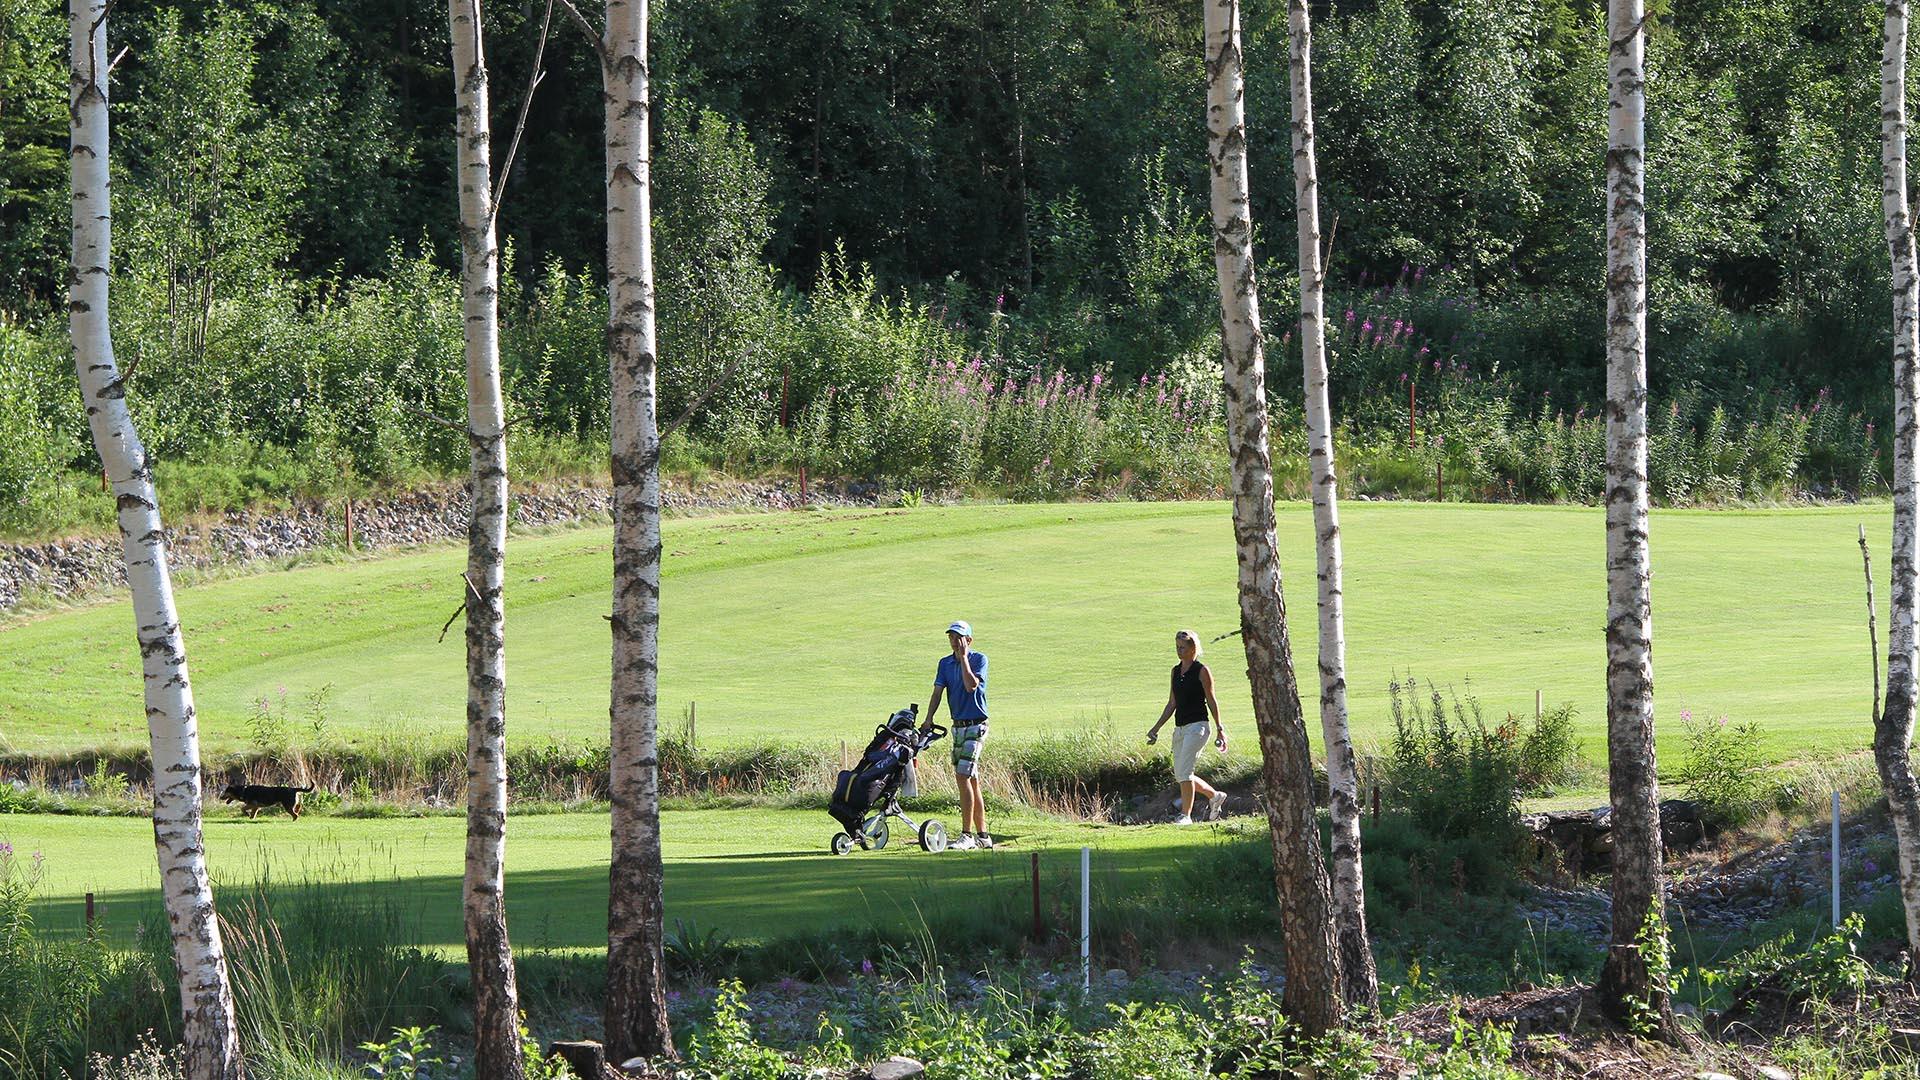 Golfers strolling on to the next tee at Valdres Golf